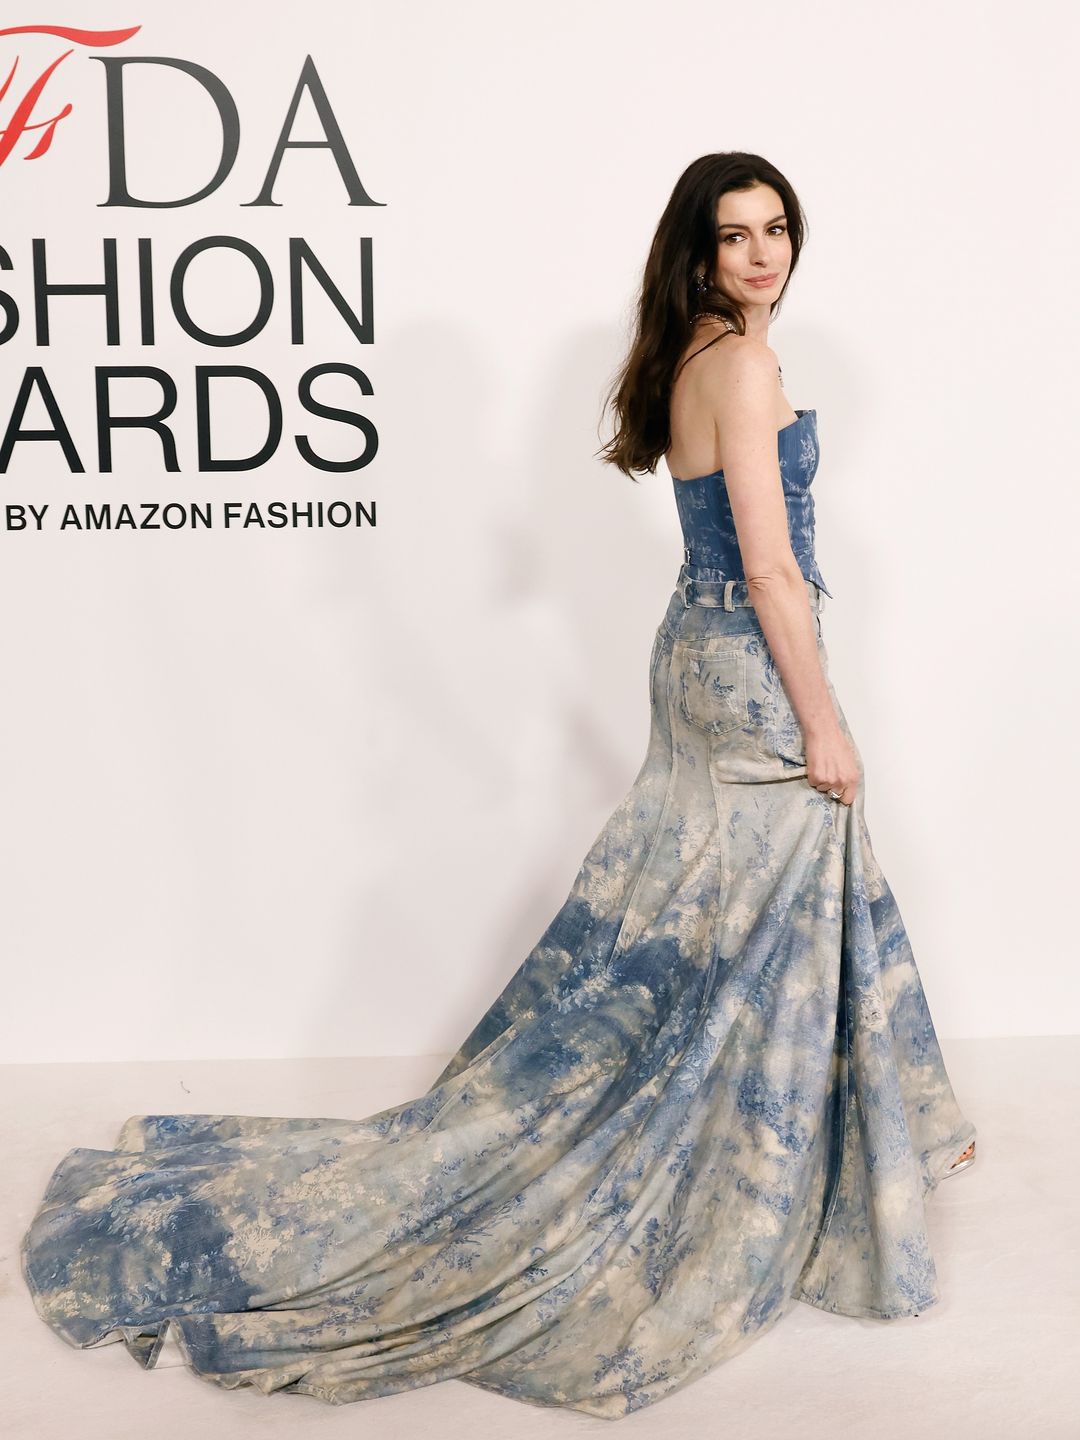 Anne Hathaway Dresses Up Denim with Diamonds at the CFDAs